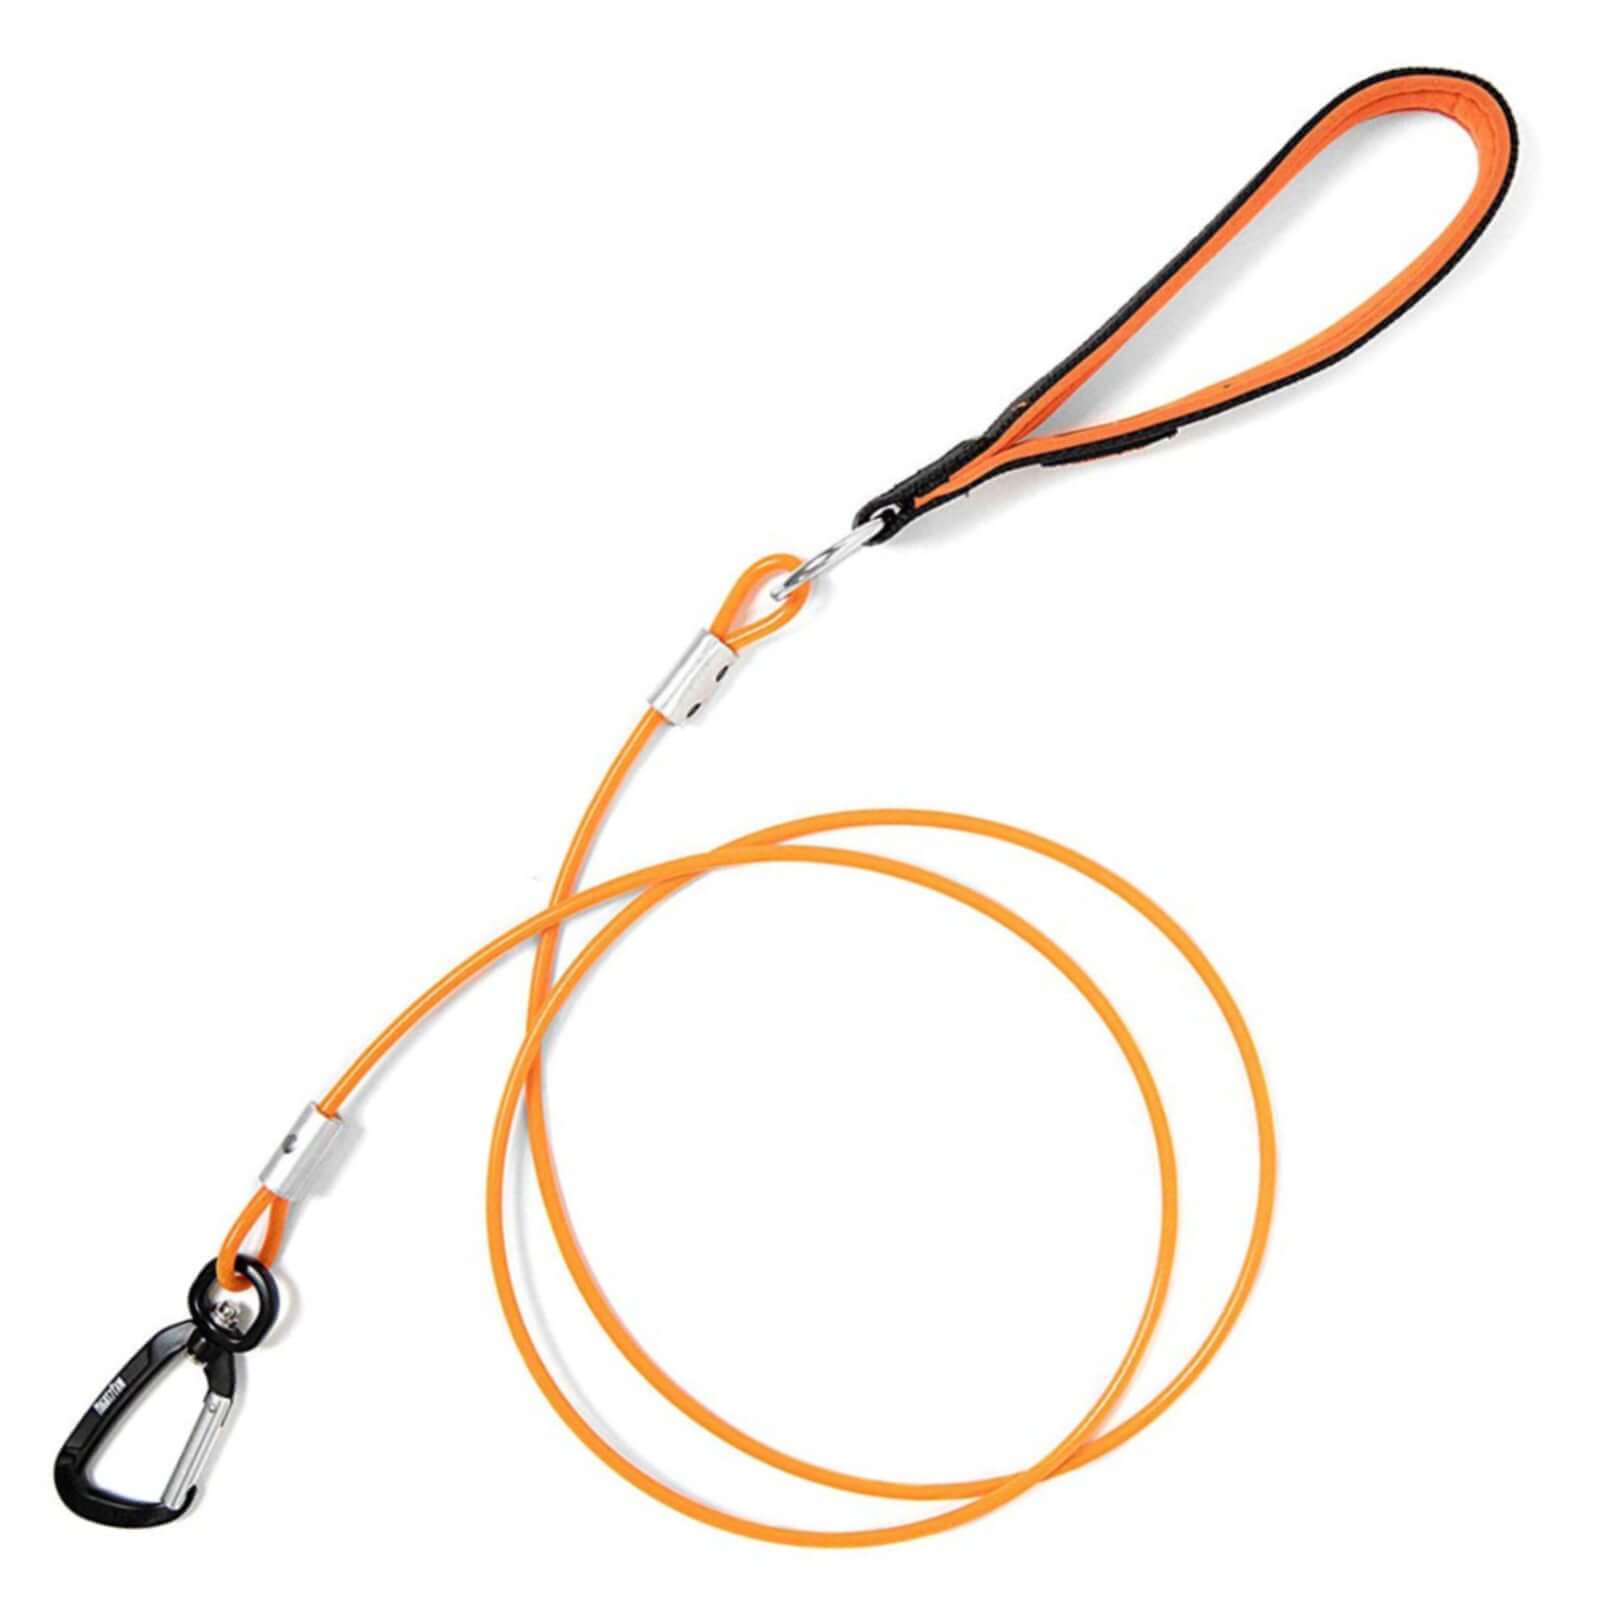 6' Chew Proof Cable Leash - Steel Braided Cable & Padded Handle